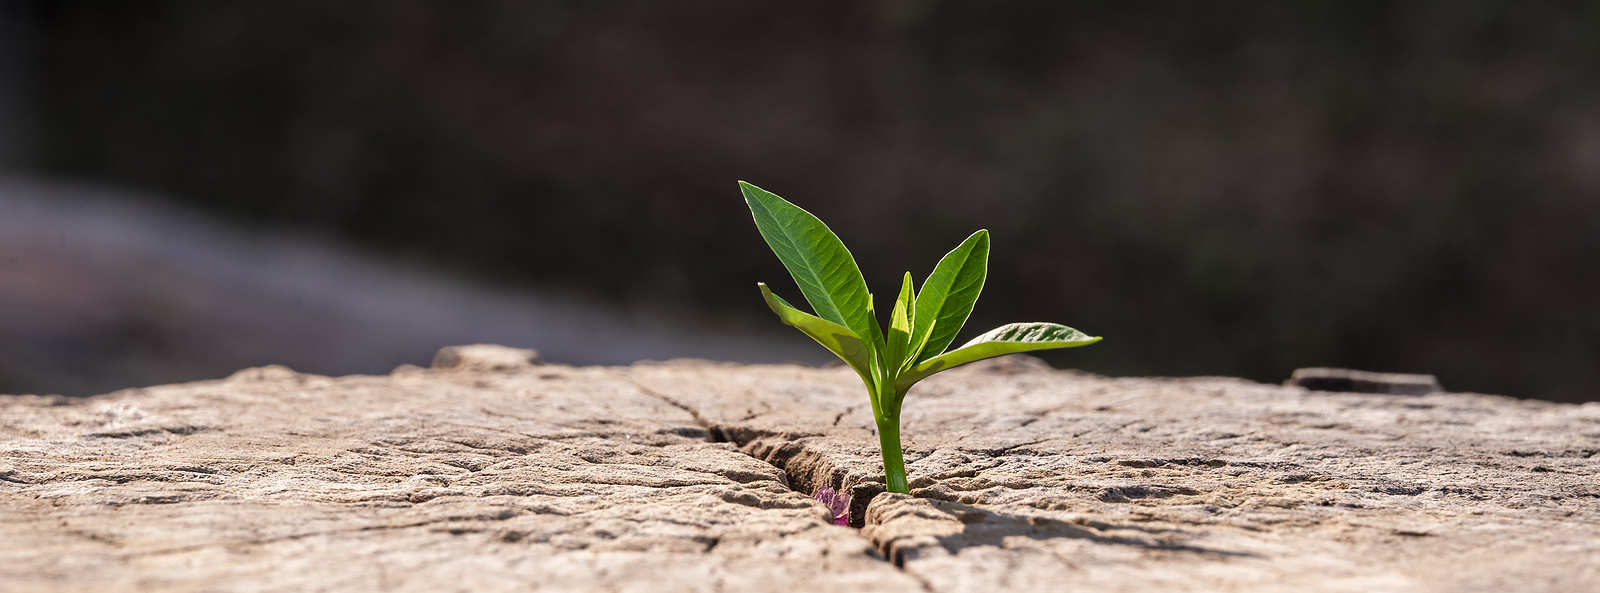 Image of a plant sprouting. this image could depict growth in your life. Get started with therapy for life transitions with a life transitions therapist in Virginia today. 22974 | 22902 | 22947